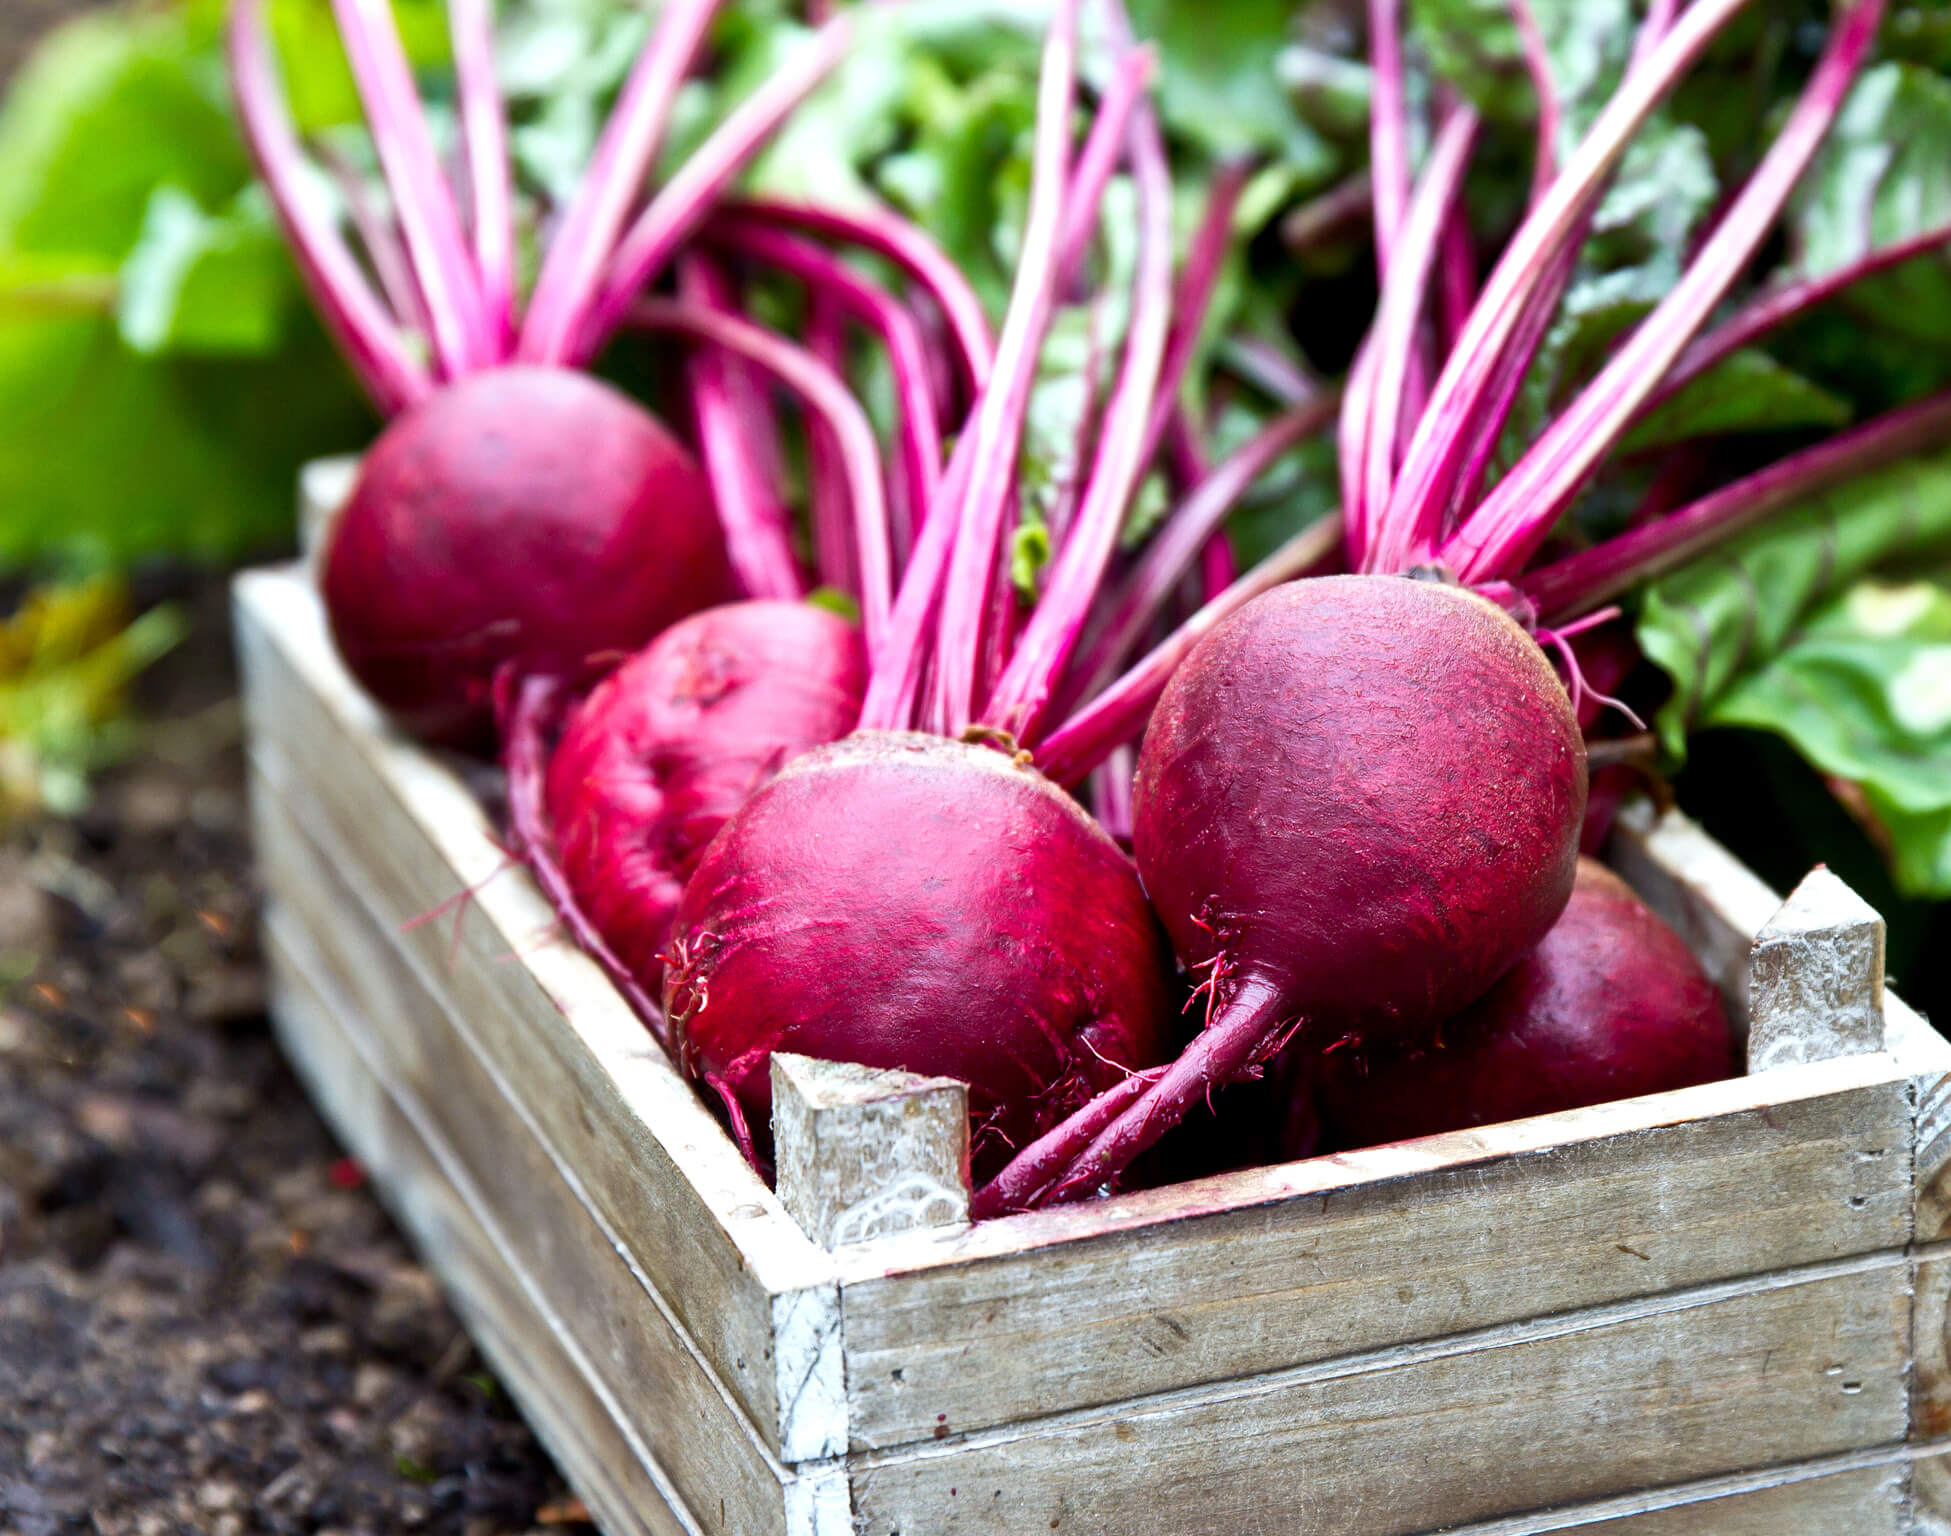 Benefits of beets: 10 reasons to eat more beets